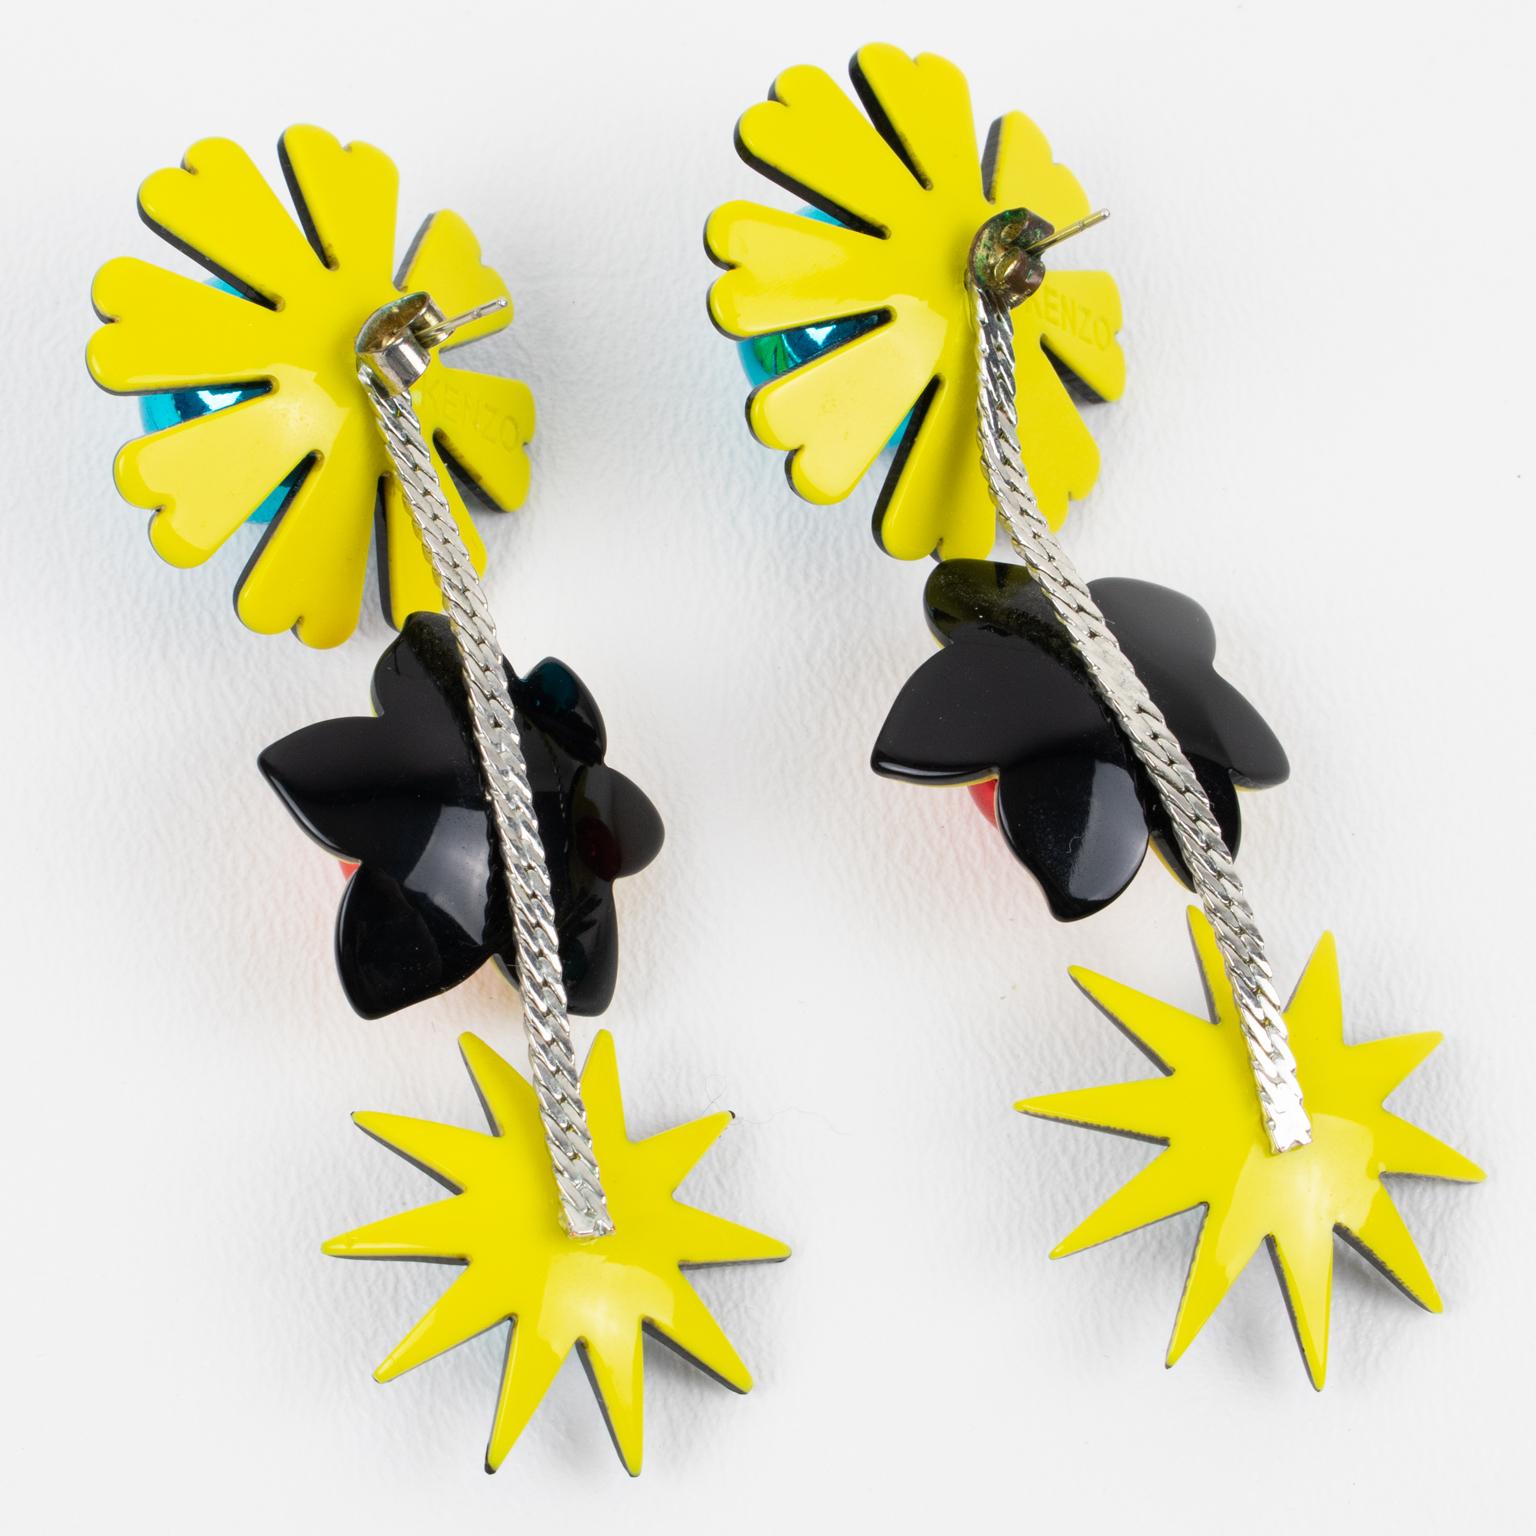 Kenzo Black and Yellow Resin Floral Pierced Earrings with Mirror Glass Beads In Excellent Condition For Sale In Atlanta, GA